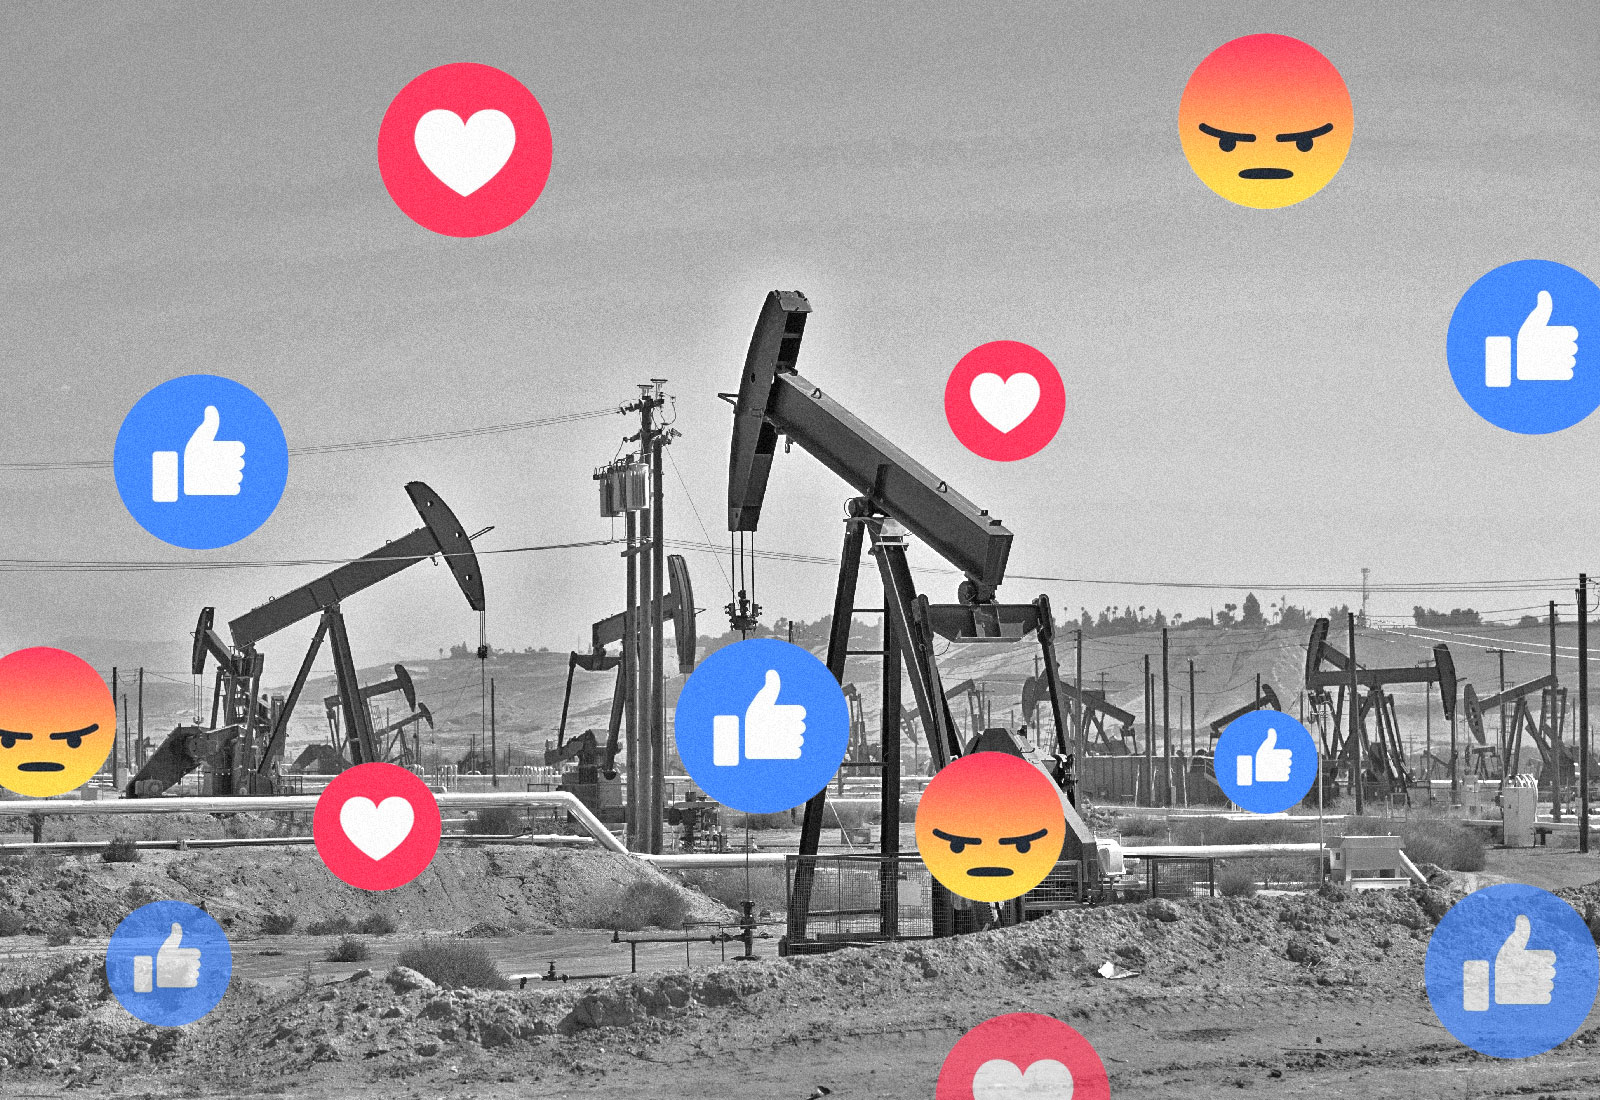 Collage: a photo of oil pumpjacks with Facebook emoji reactions on top